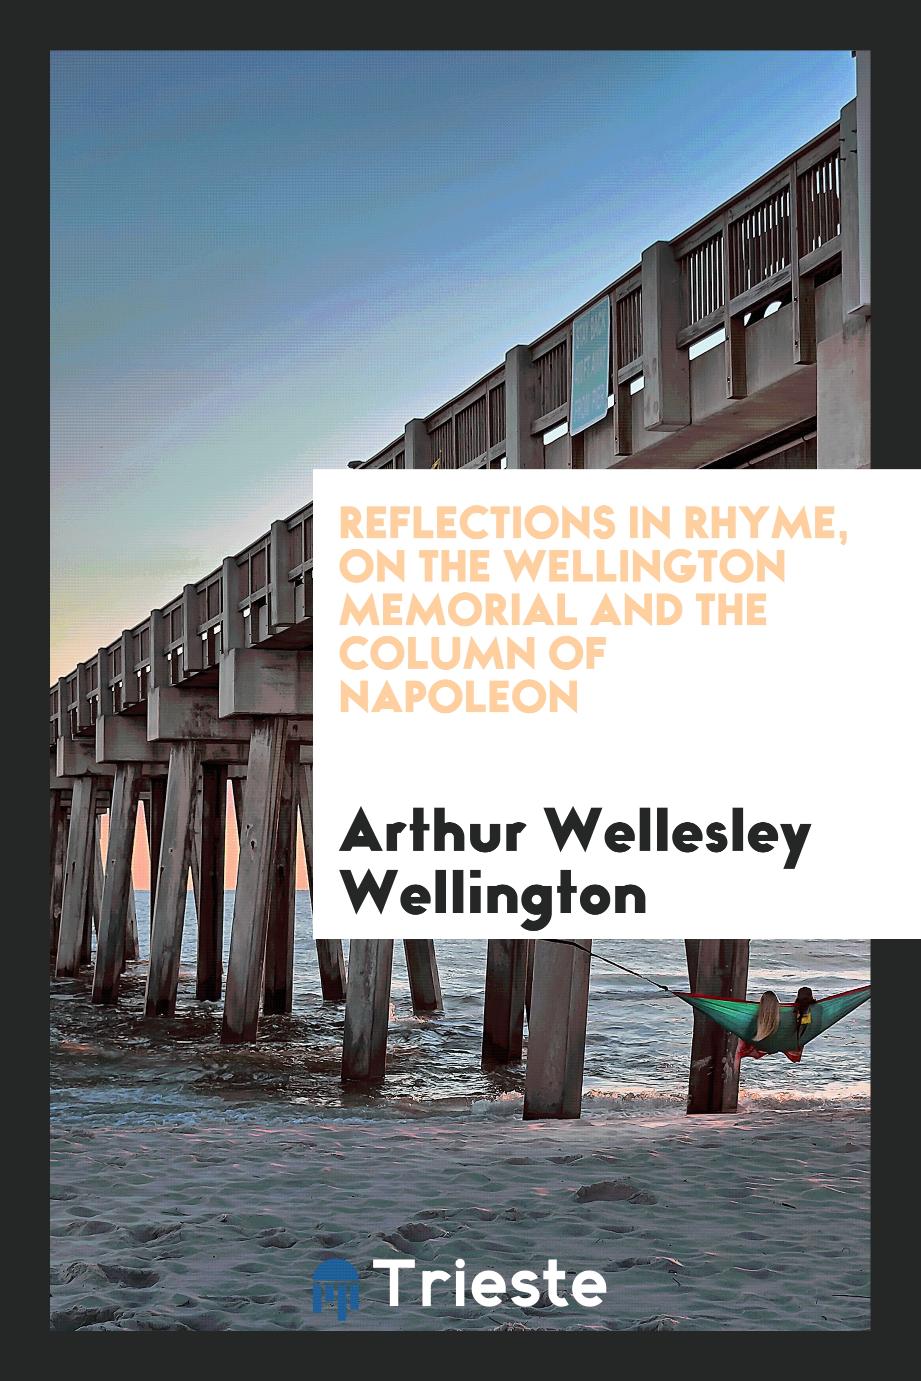 Reflections in Rhyme, on the Wellington Memorial and the Column of Napoleon